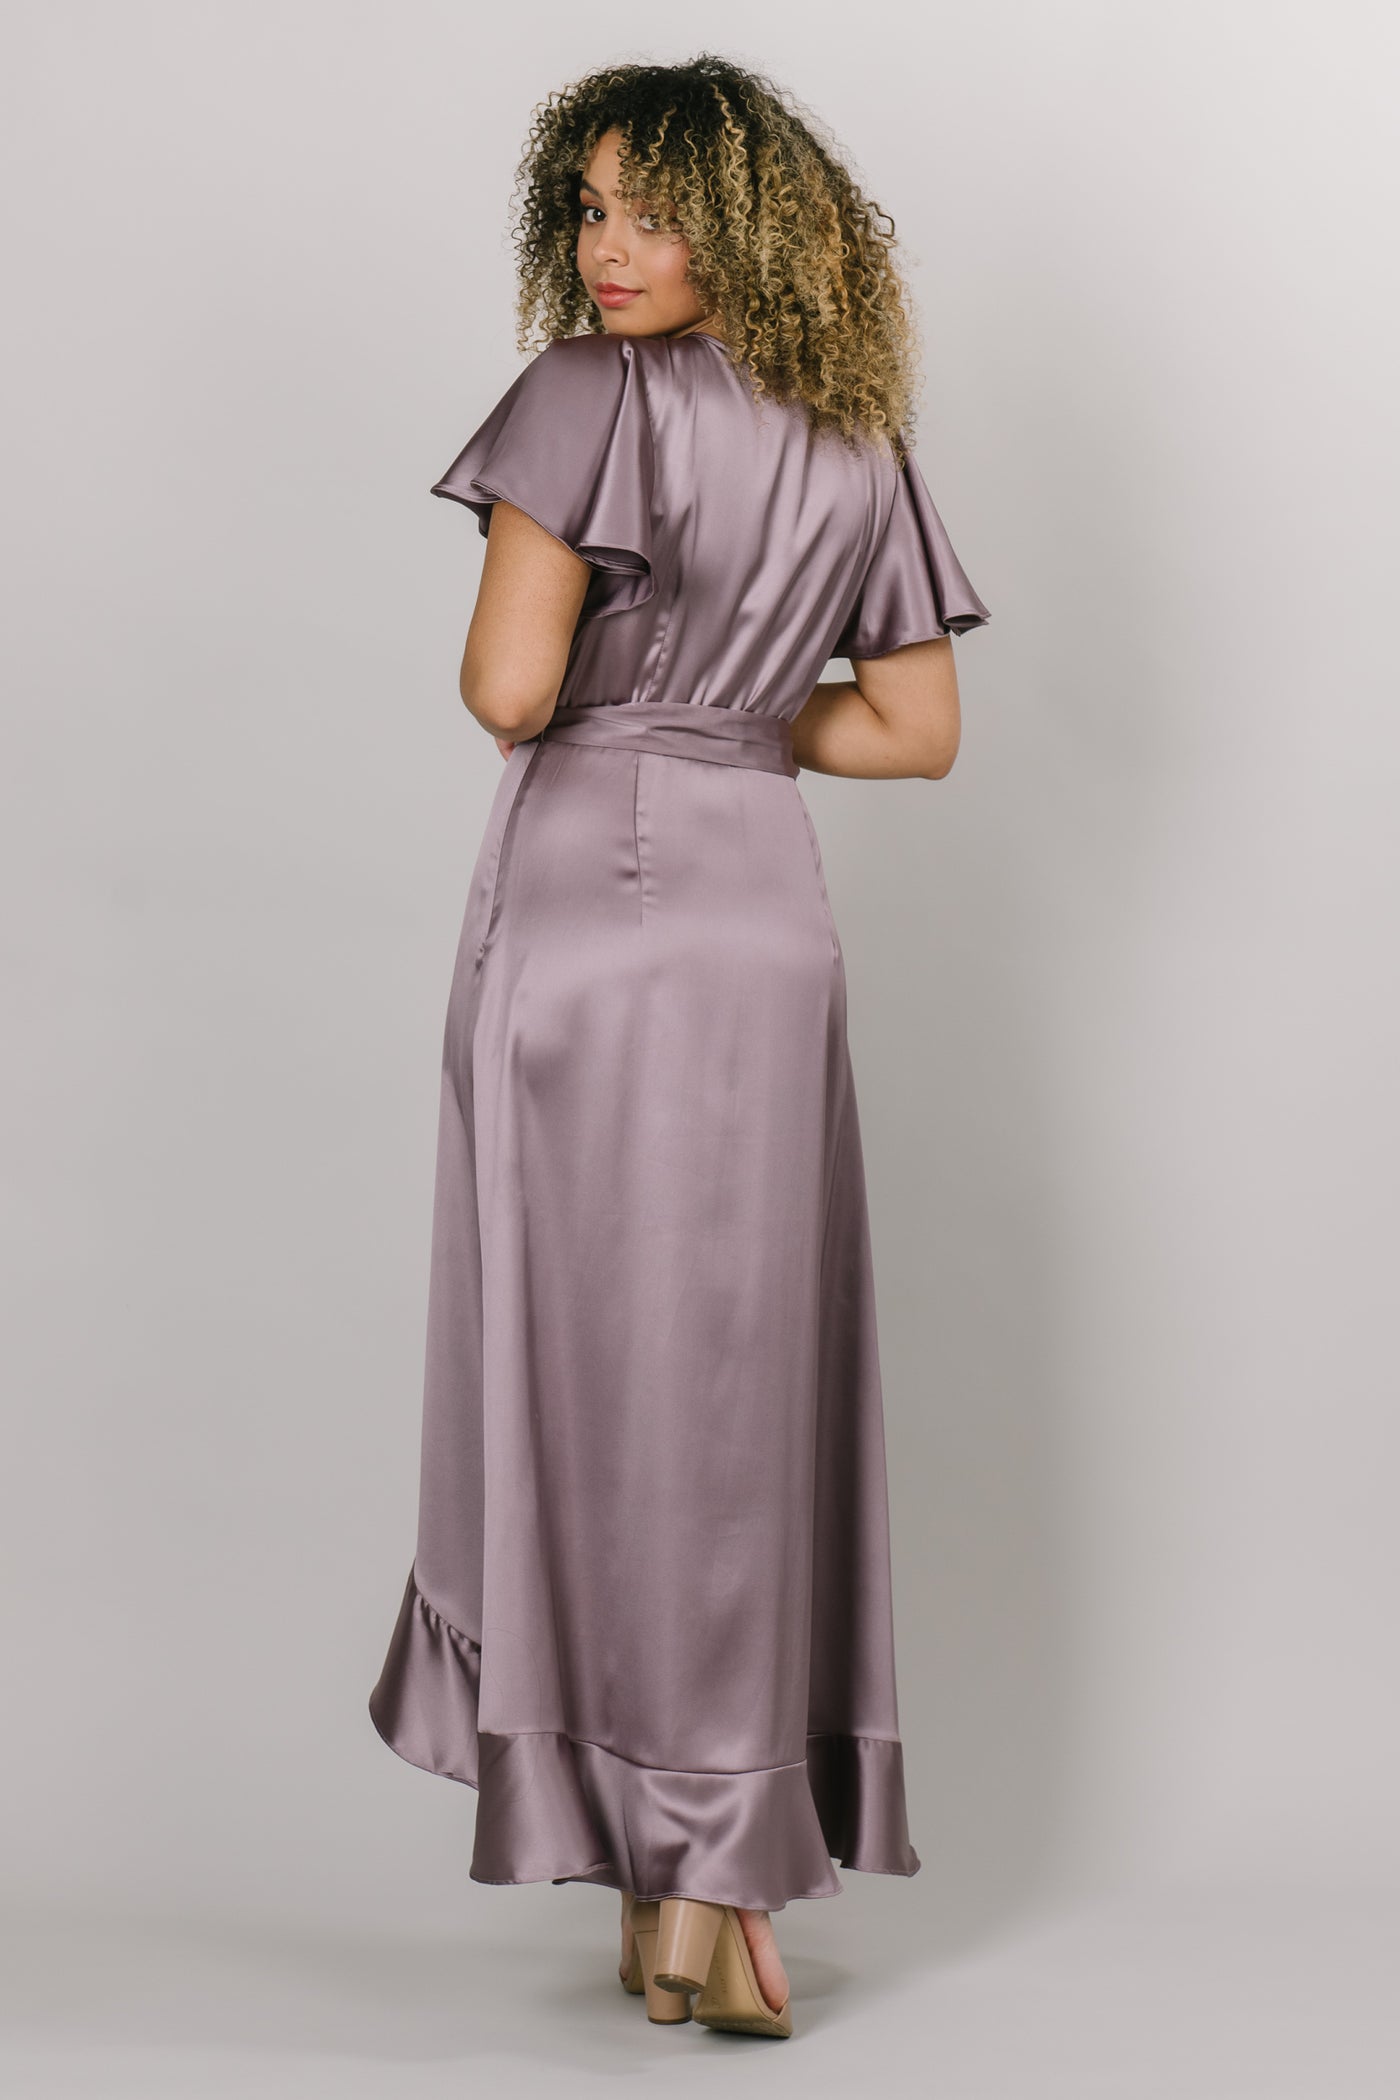 Satin wrap dress with flutter sleeves and a tie for the waist. Modest Dresses - - Everyday Dresses - Modest Prom Dress - Formalwear Modest Dresses - Bridesmaid Modest Dresses.